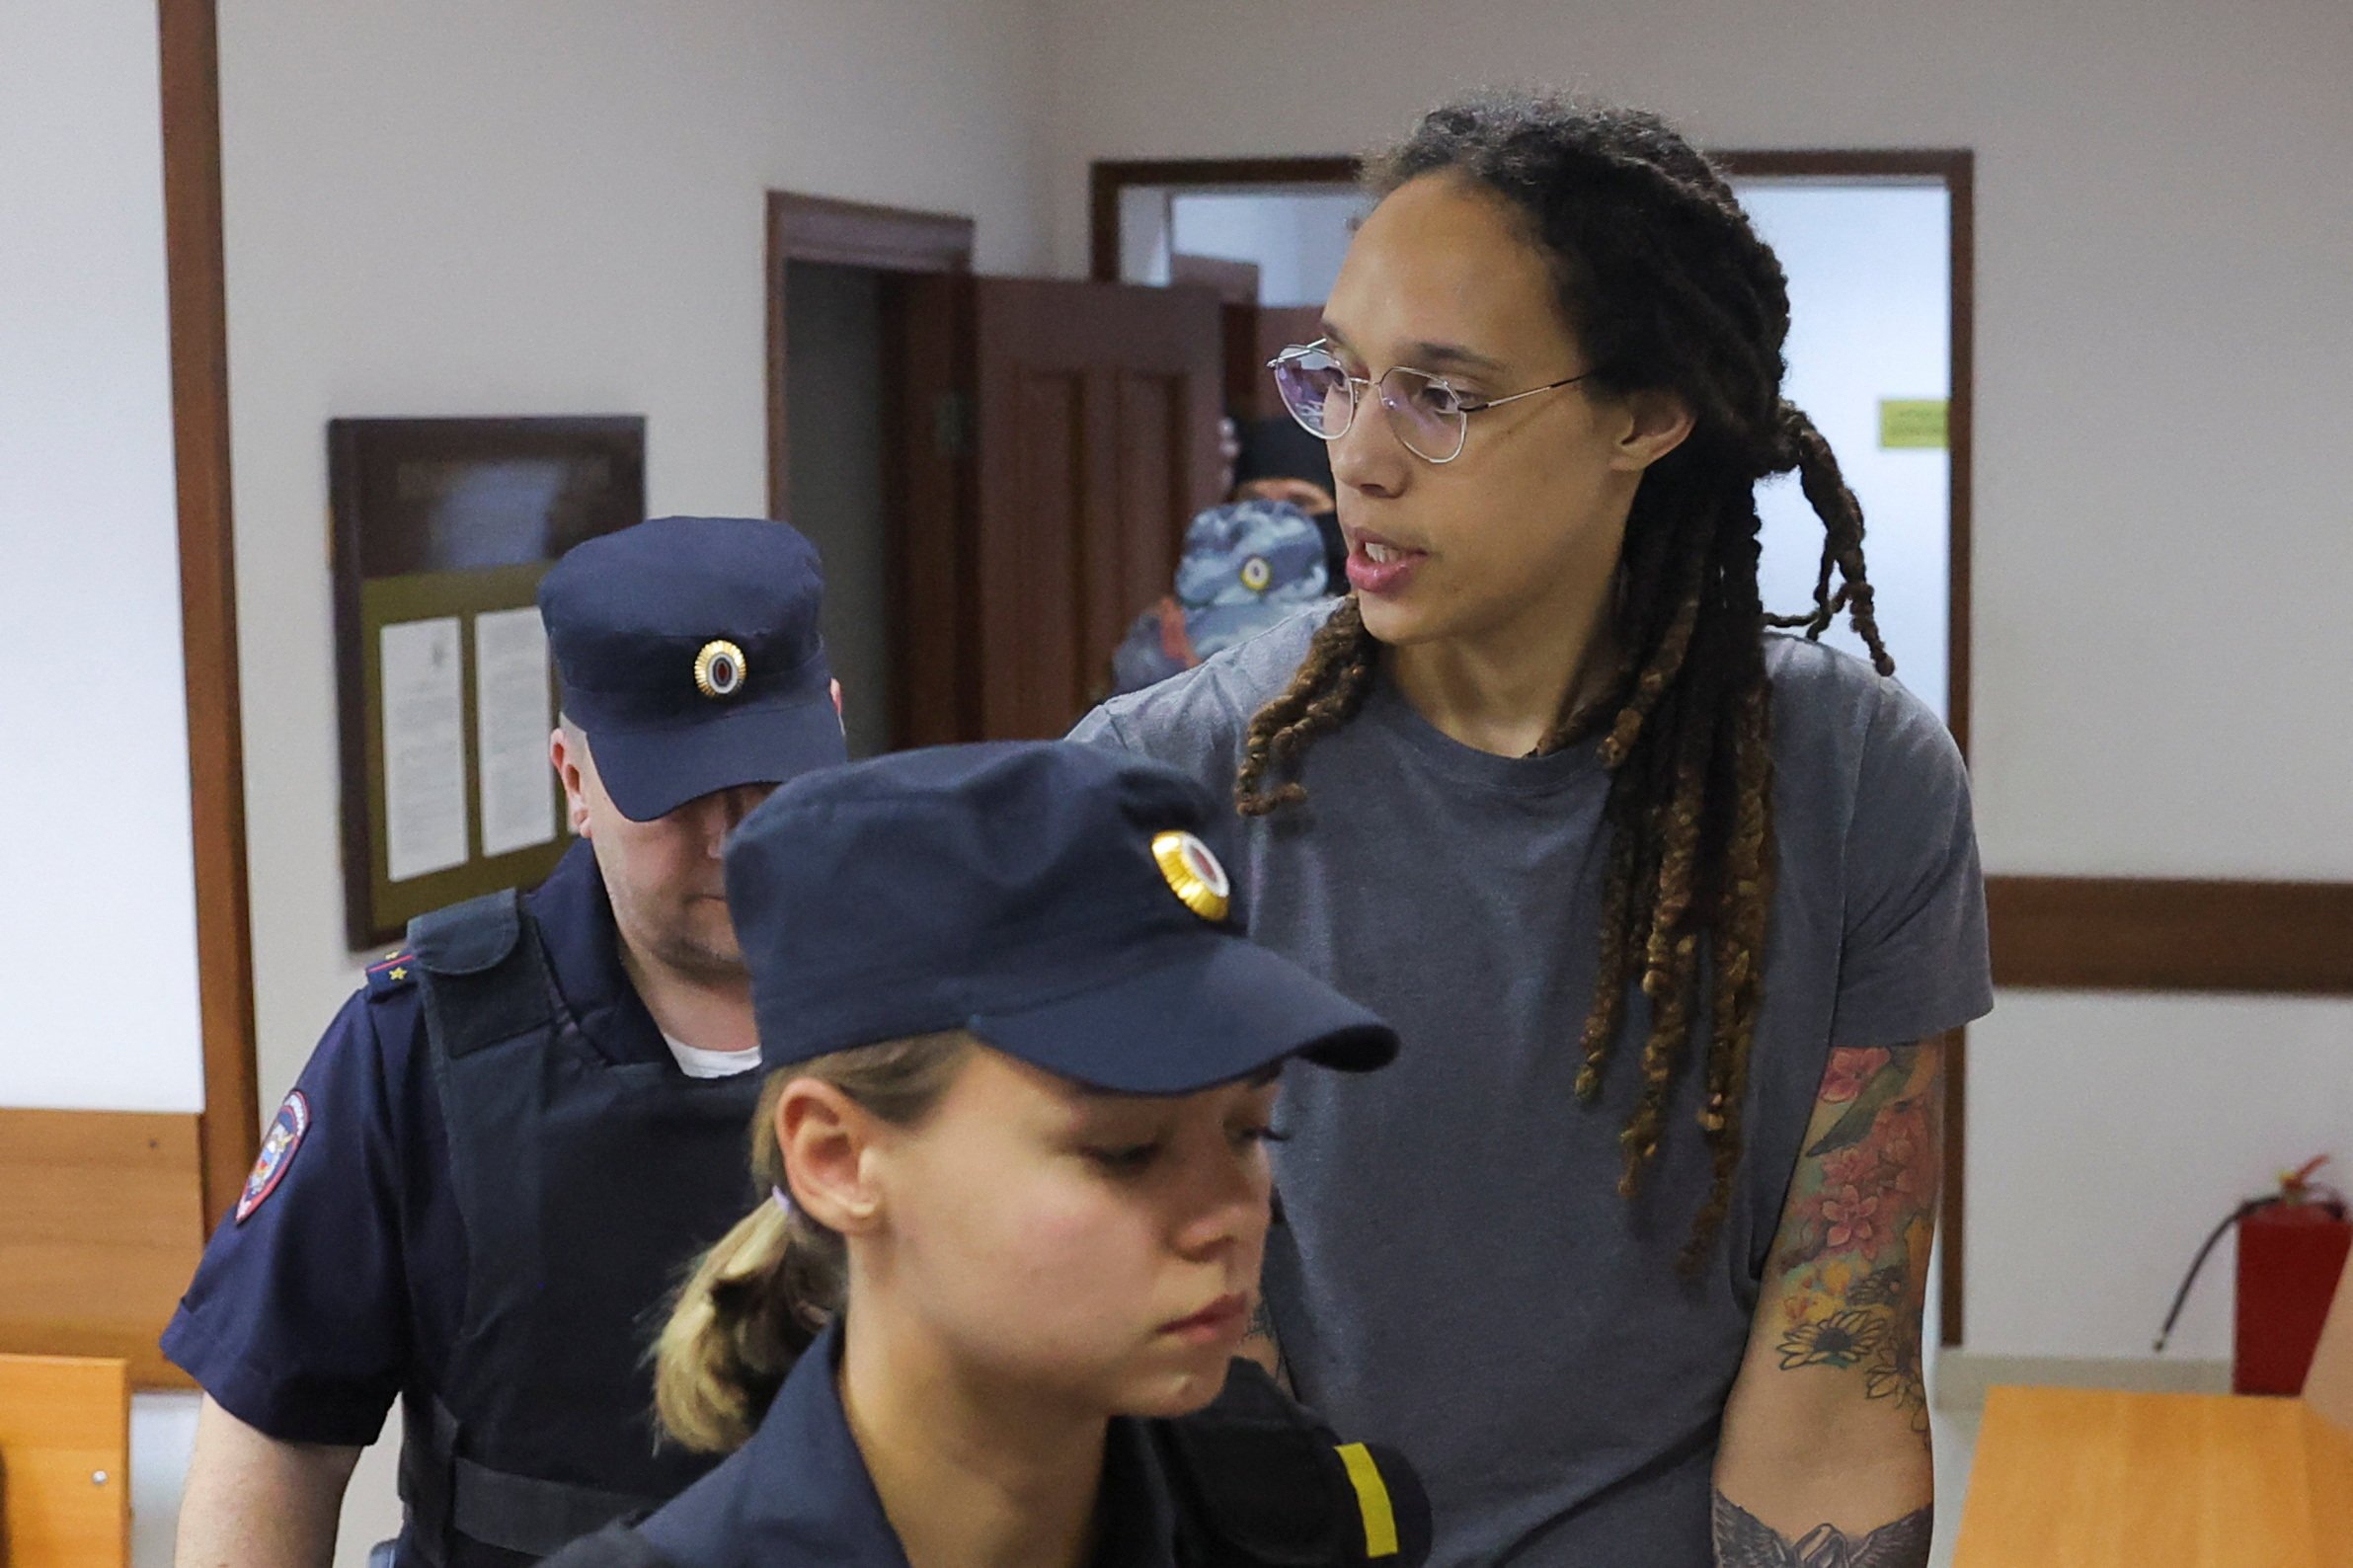 US basketball player Brittney Griner, who was detained at Moscow’s Sheremetyevo airport and later charged with illegal possession of cannabis, is escorted after the court’s verdict in Khimki outside Moscow, on Thursday. Photo: Reuters